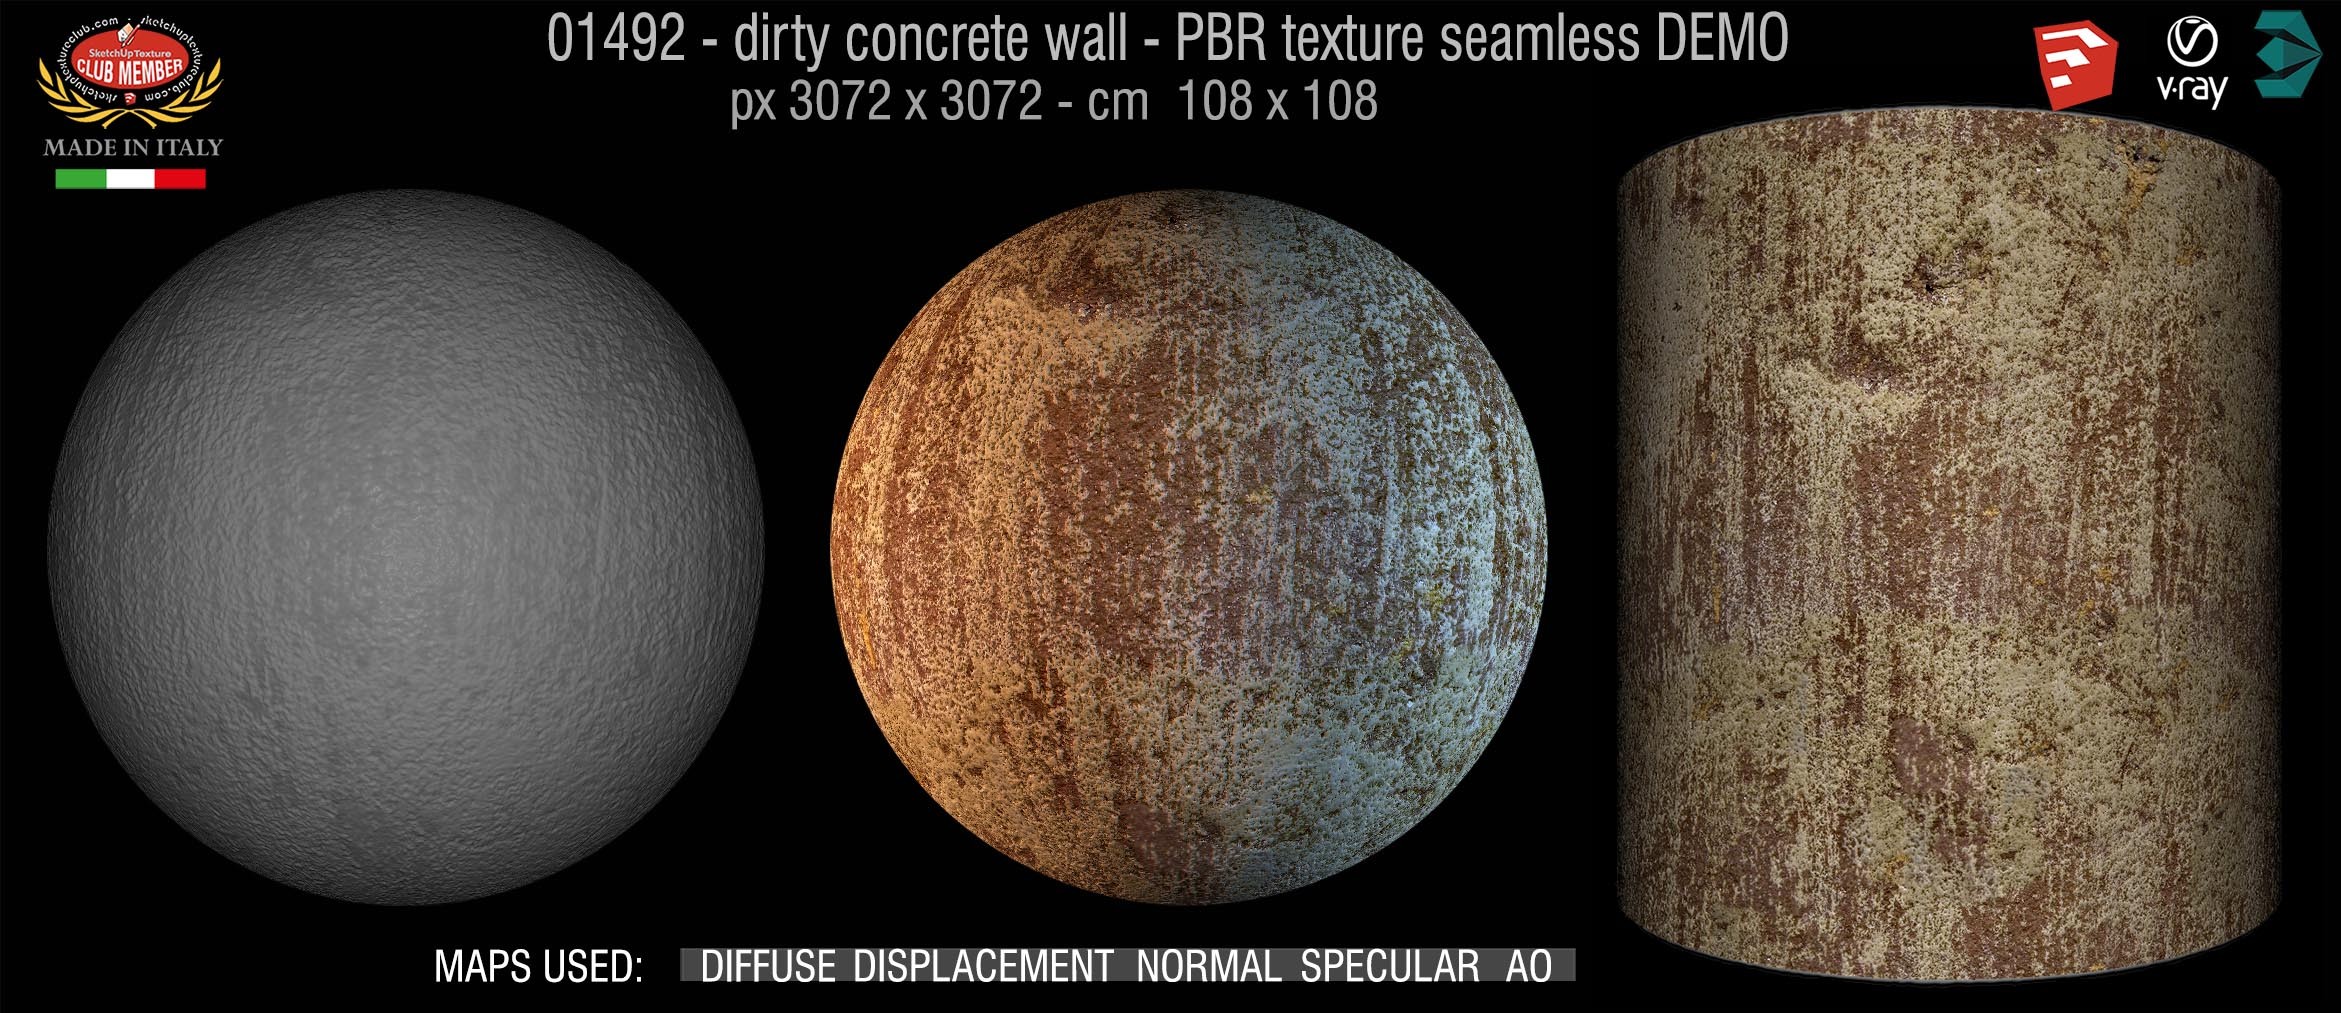 01492 Concrete bare dirty wall PBR texture seamless DEMO